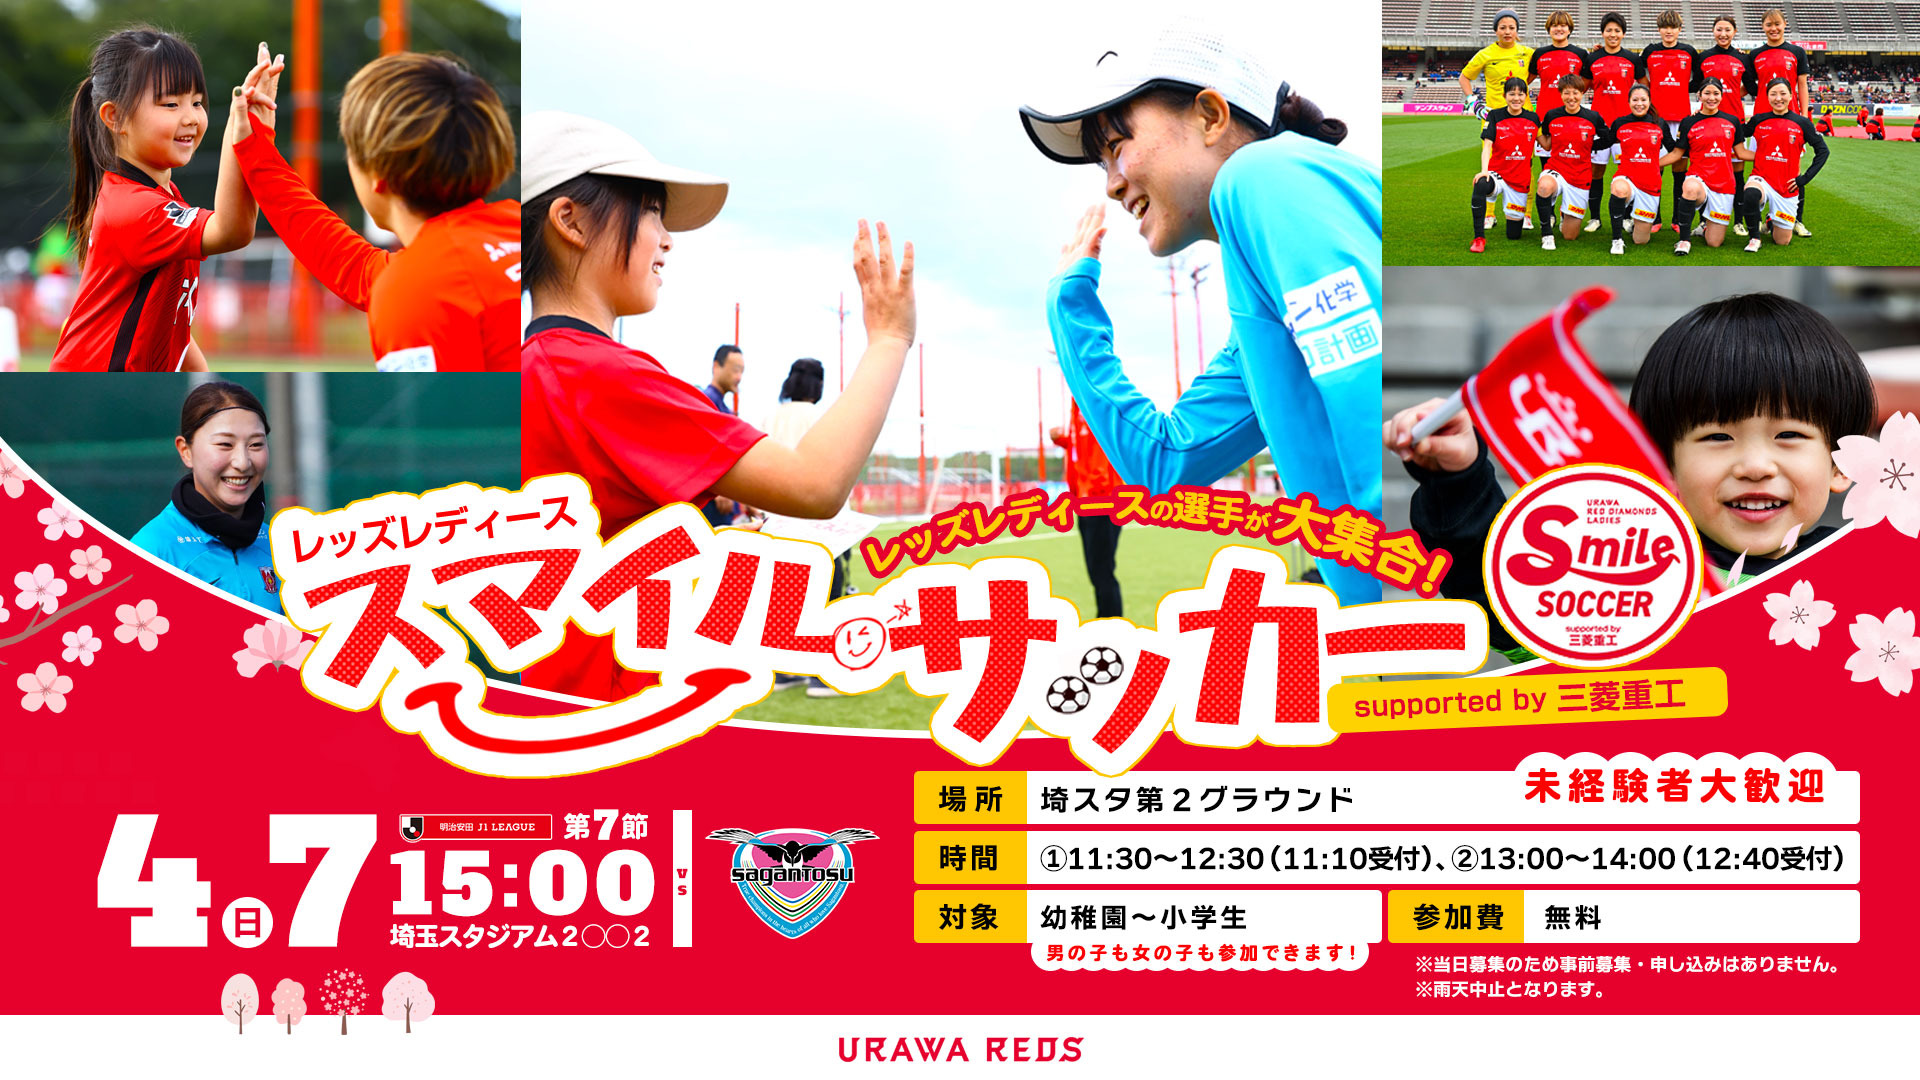 Announcement of &quot;Reds Ladies Smile Soccer supported by Mitsubishi Heavy Industries&quot; (updated 4/6)